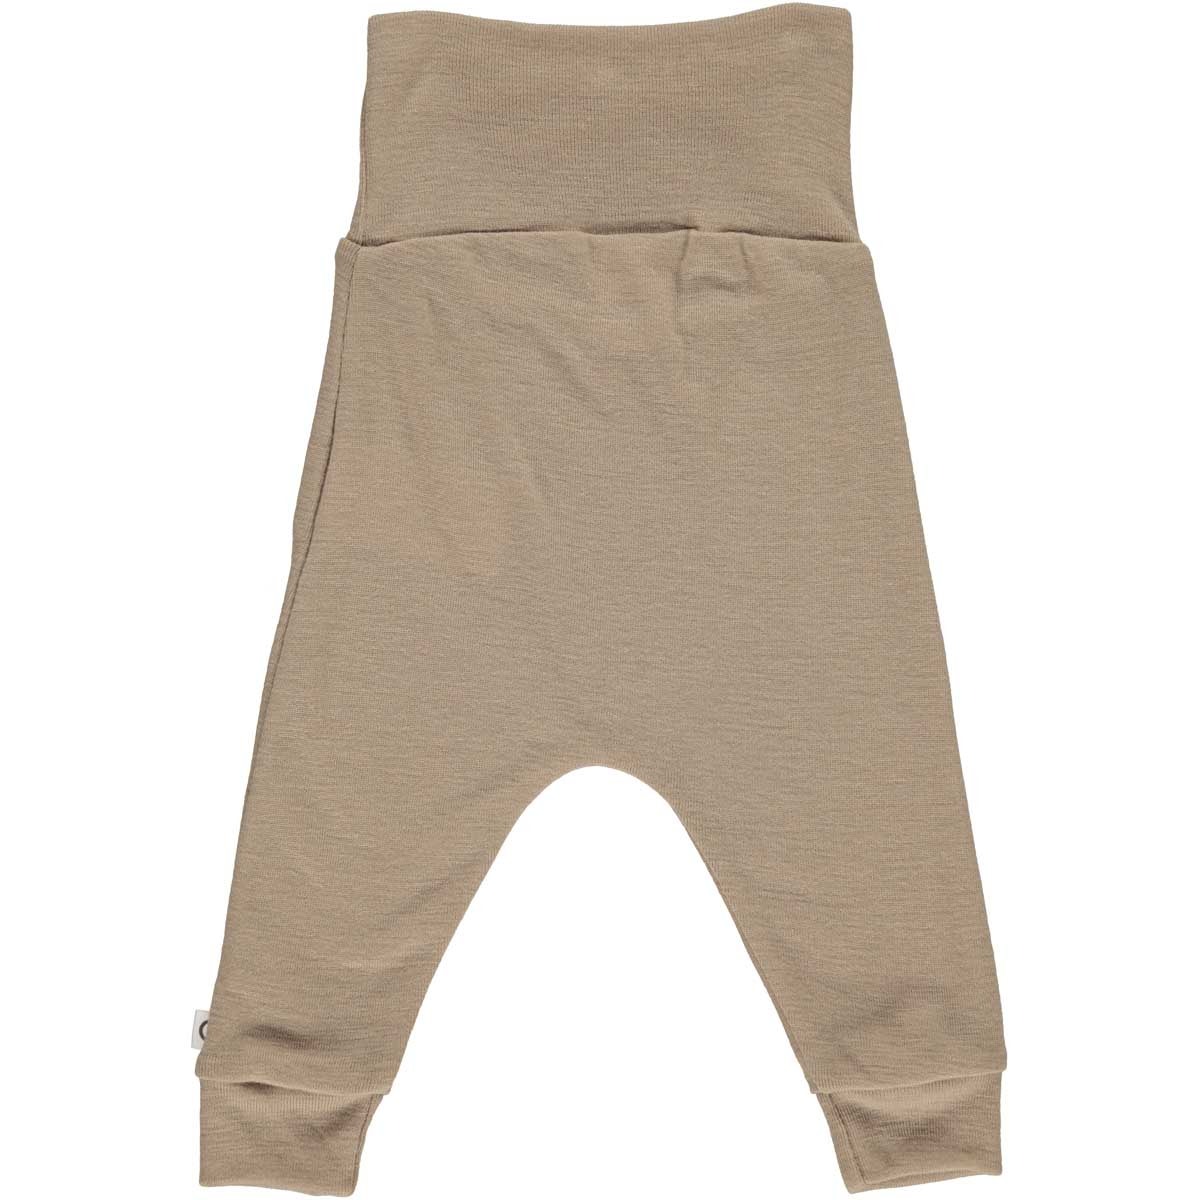 MAMA.LICIOUS Wolle baby-hose -Seed - 1535075600